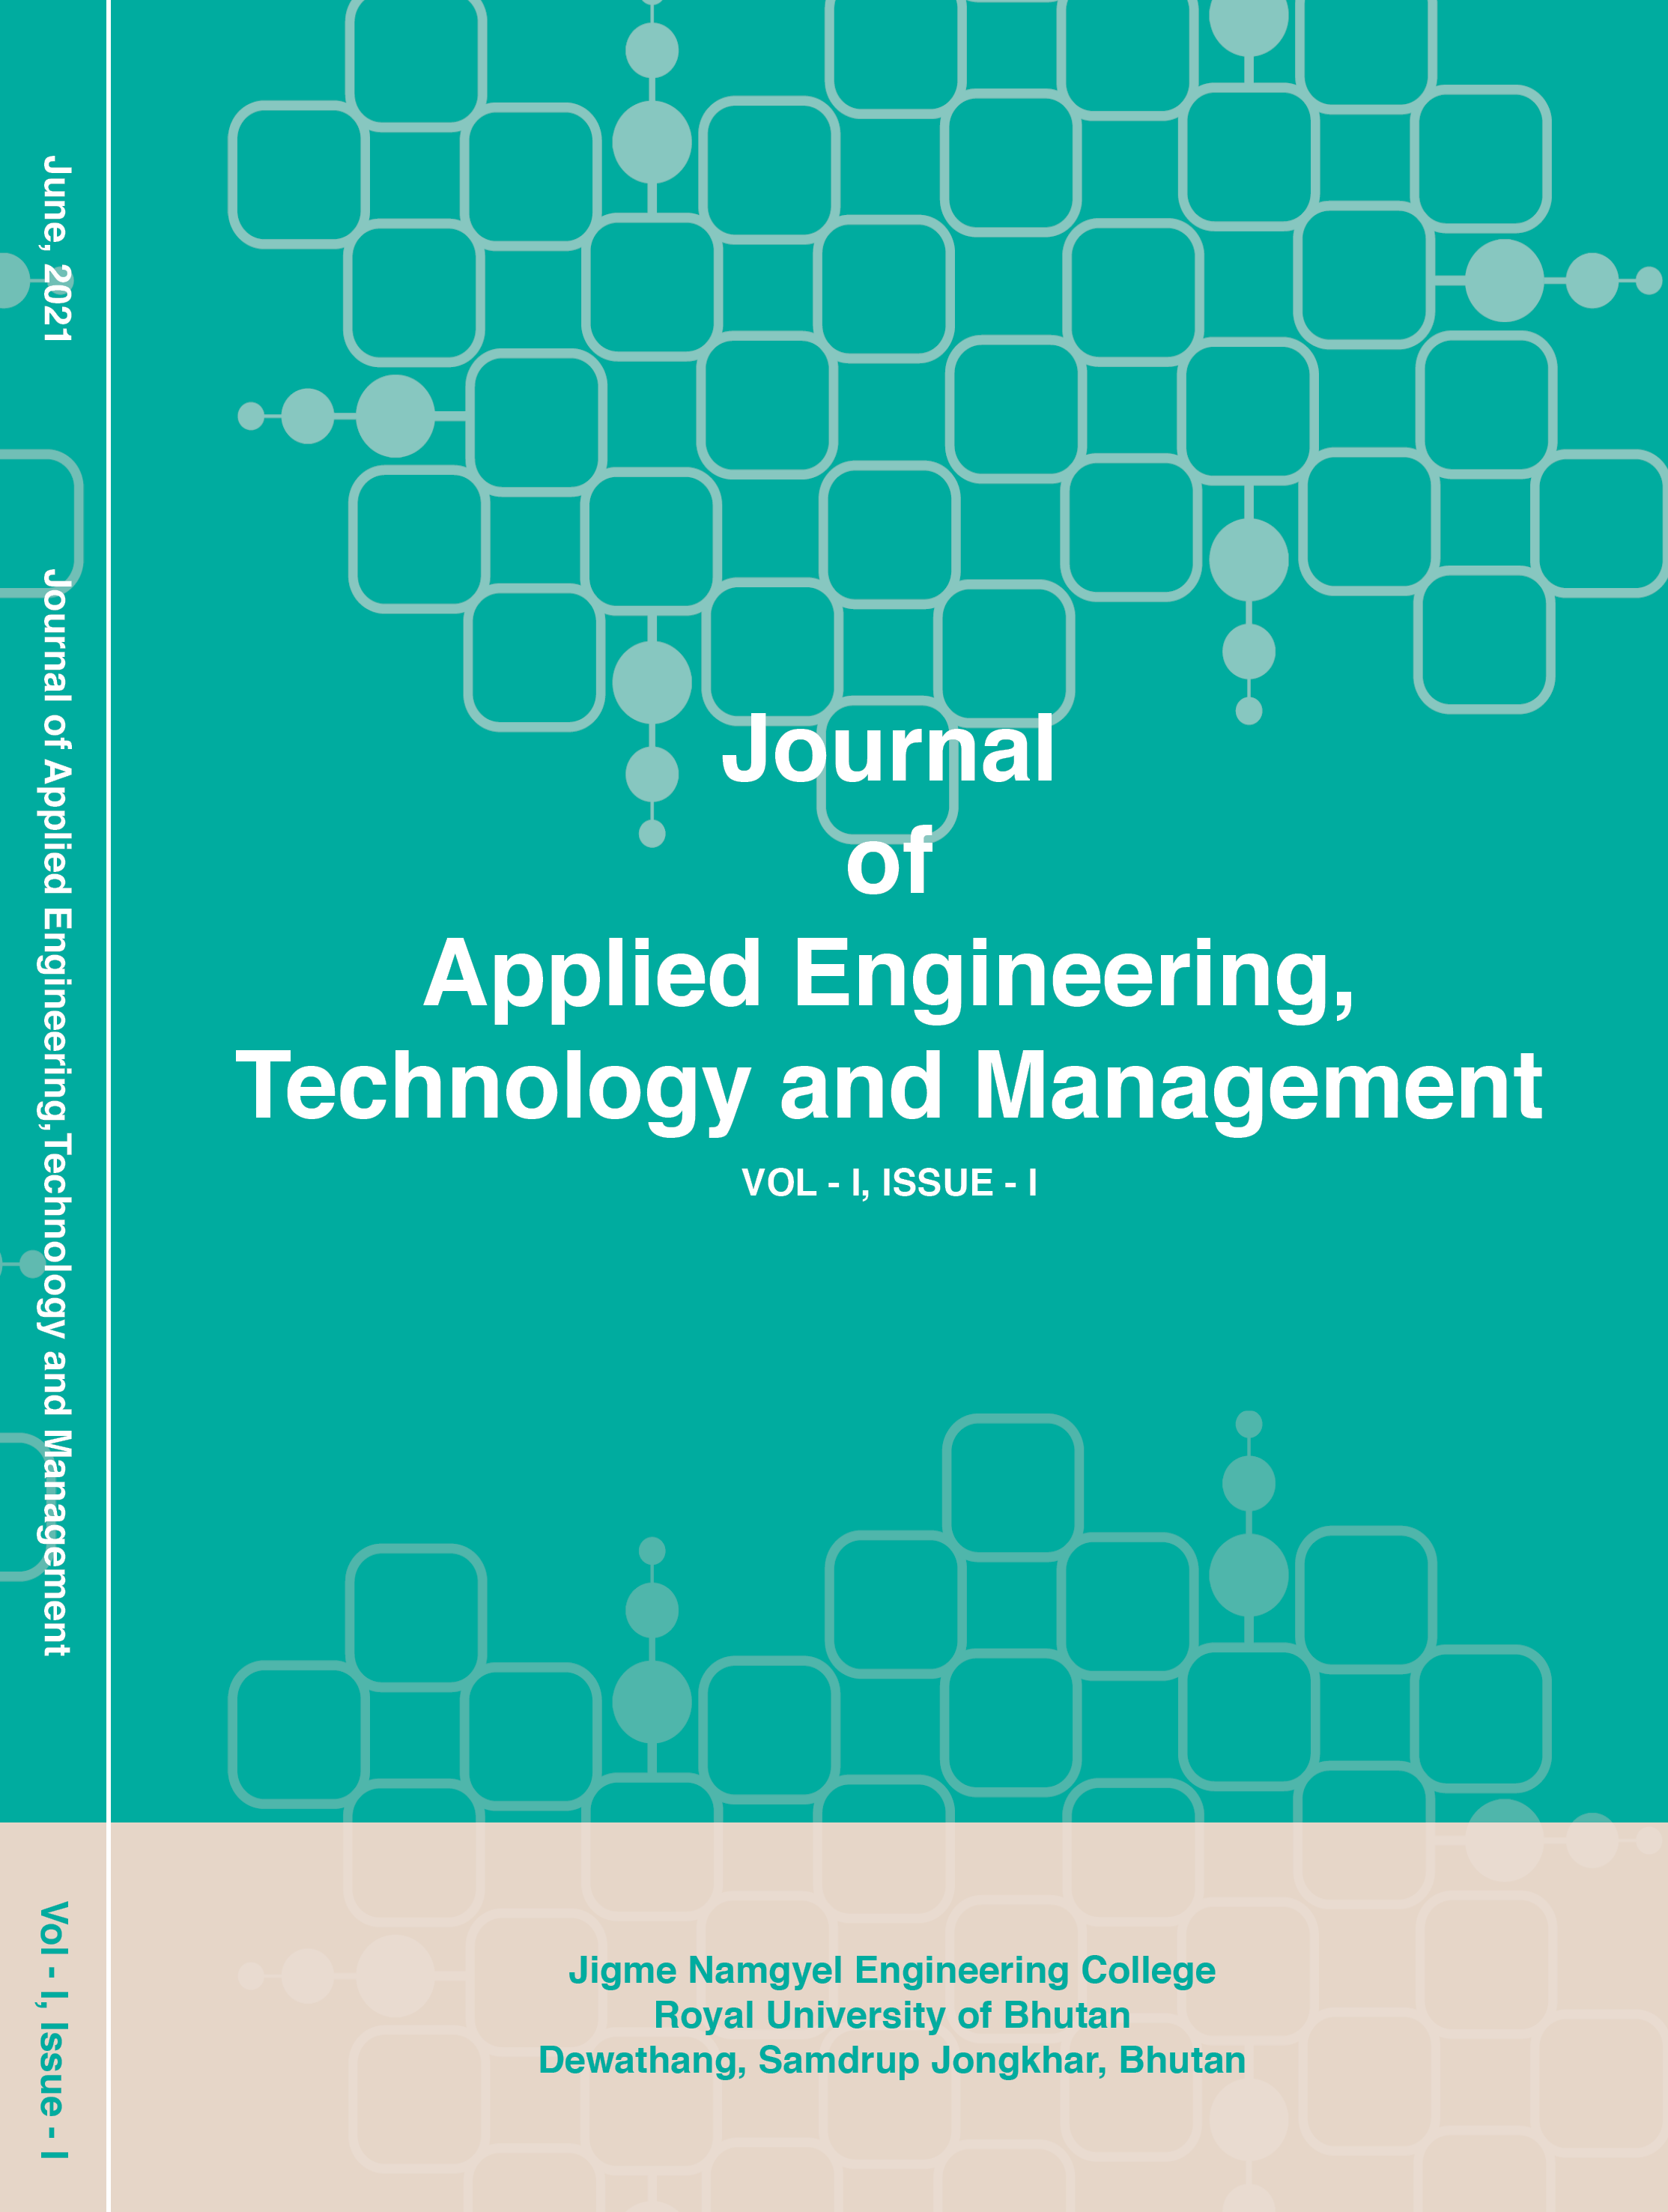 Journal of Applied Engineering, Technology and Management